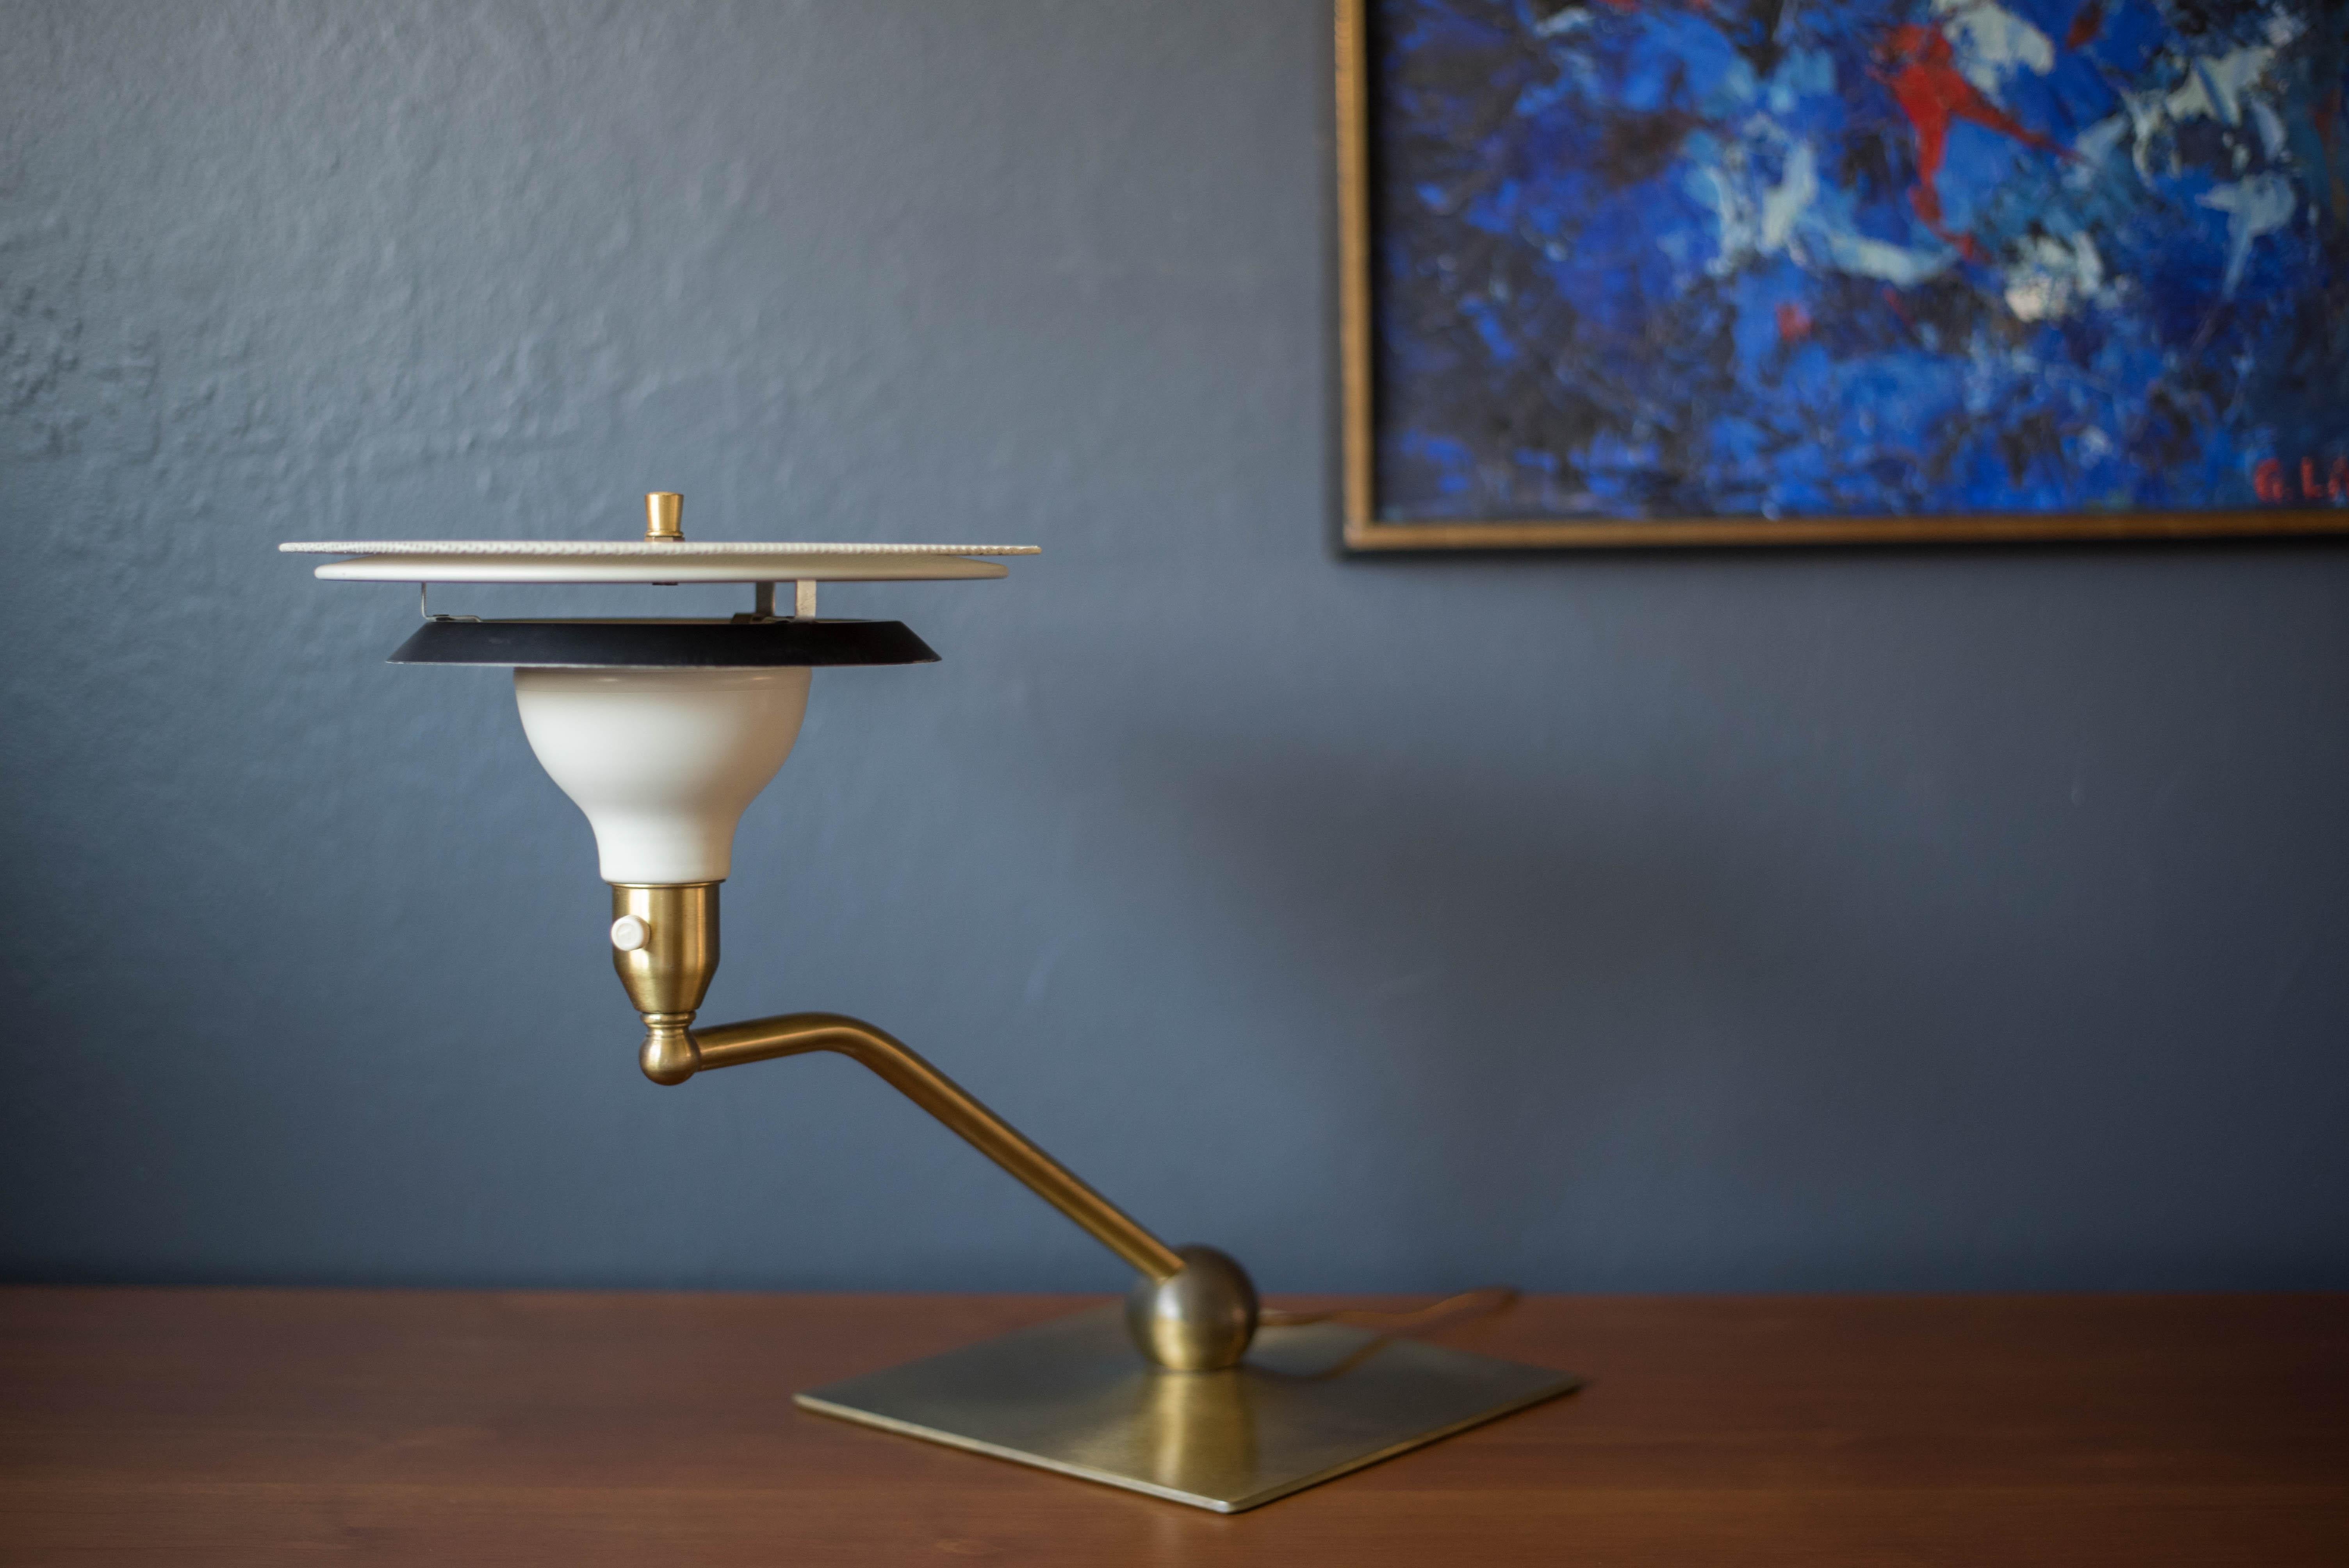 Vintage sight light desk lamp manufactured by M.G. Wheeler Company, circa 1960's. Features a rotating swivel arm and supporting base in brass. Complete with a space age black and white contrasting shade including a perforated metal diffuser. Perfect